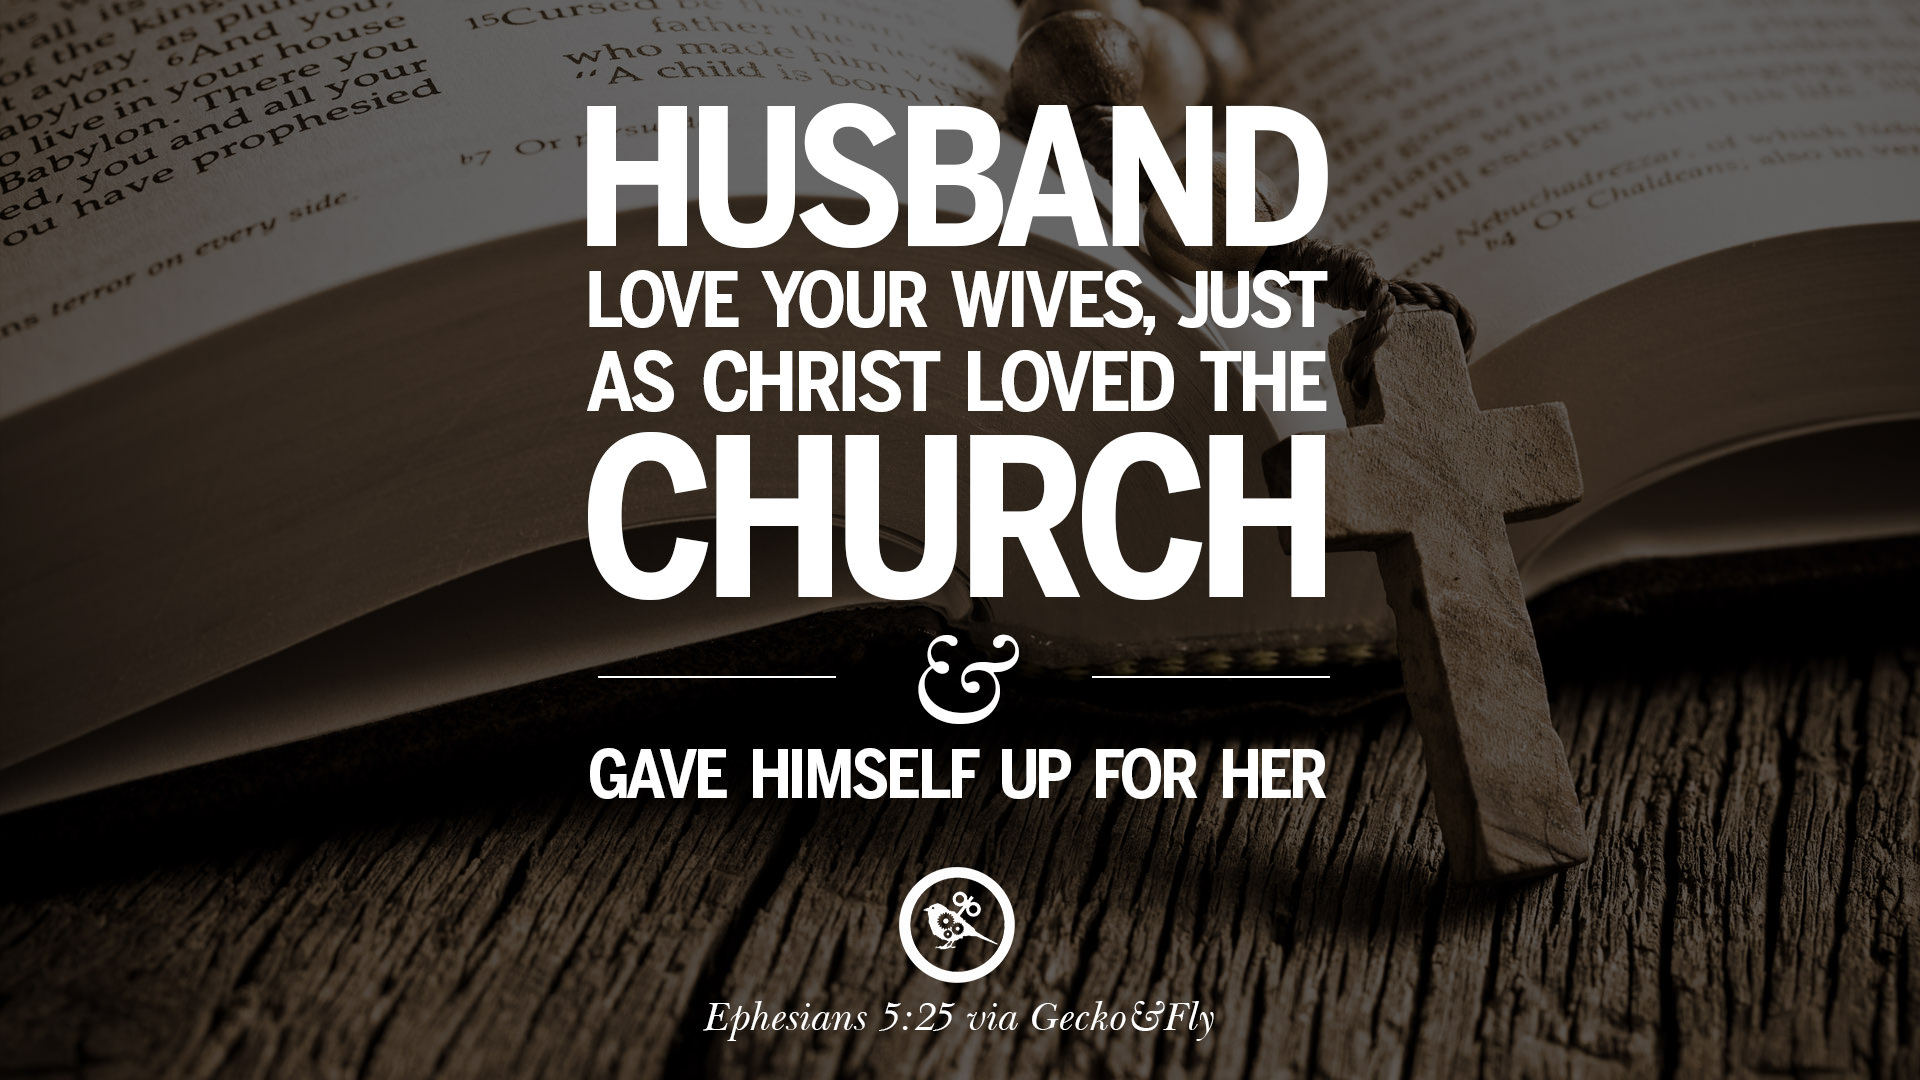 Husband love your wives just as Christ loved the church and gave himself up for